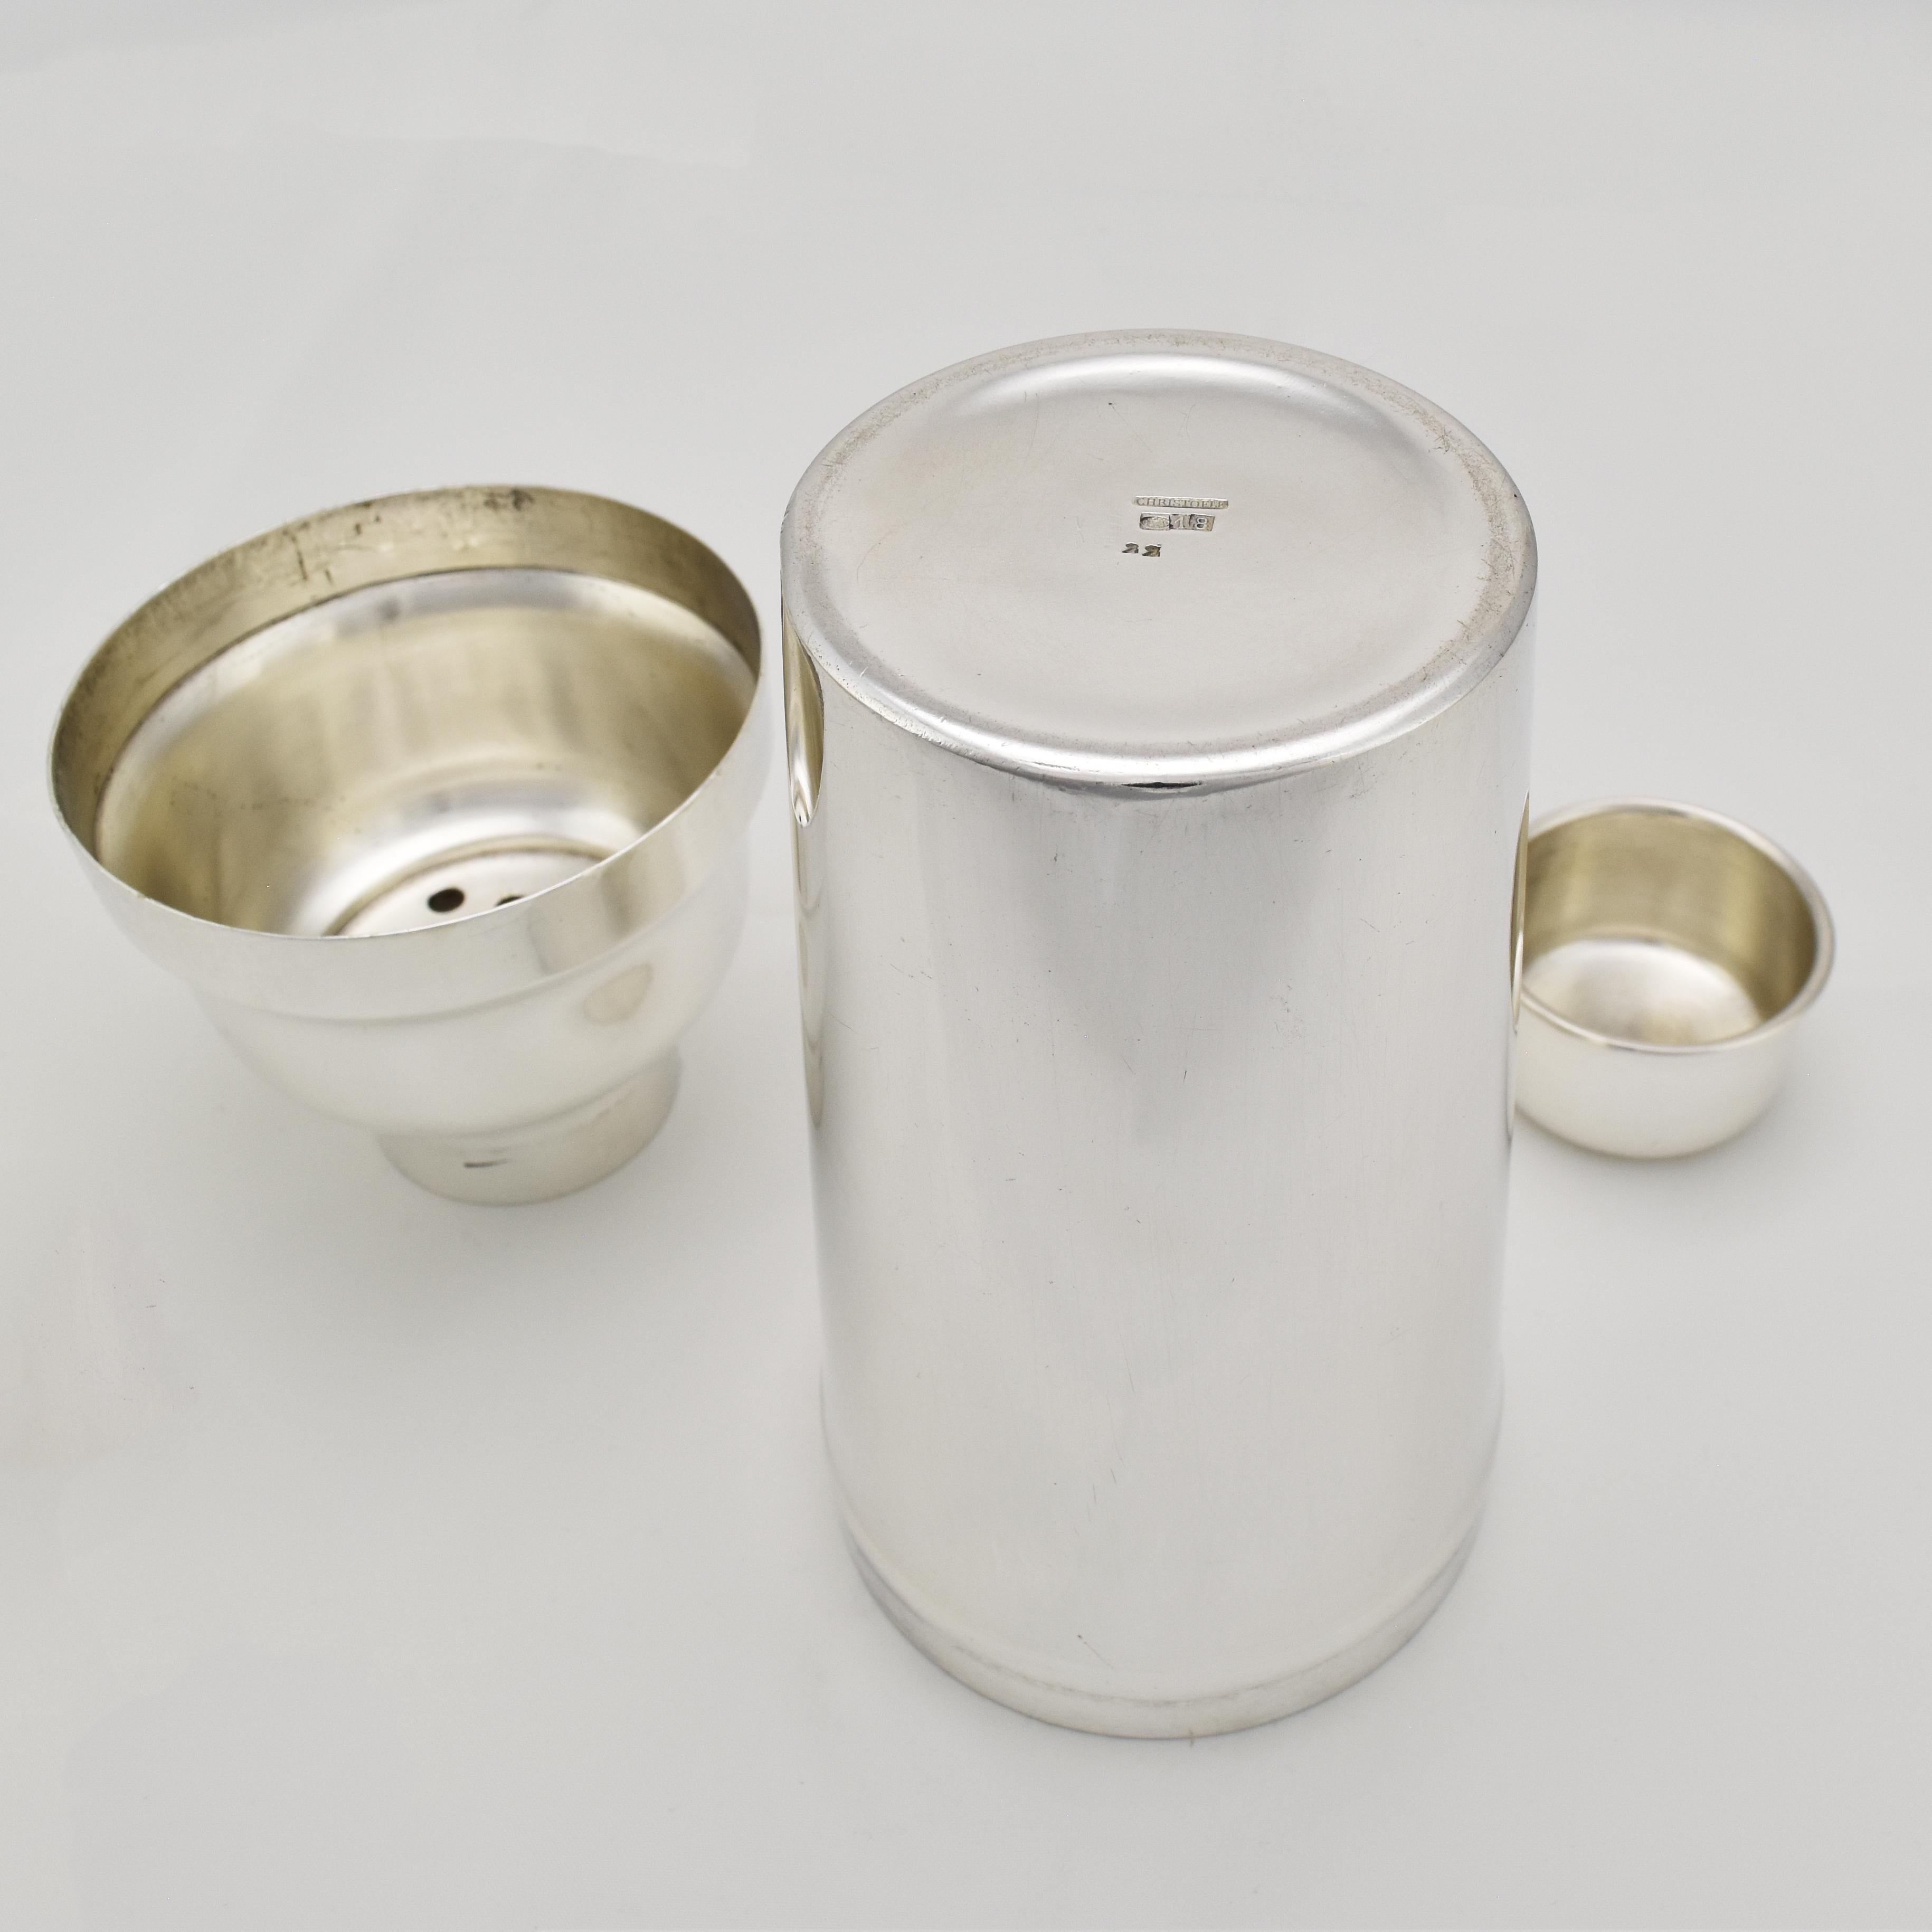 Silver Plate Art Deco Cocktail Martini Shaker Silverplate by Christofle Paris For Sale